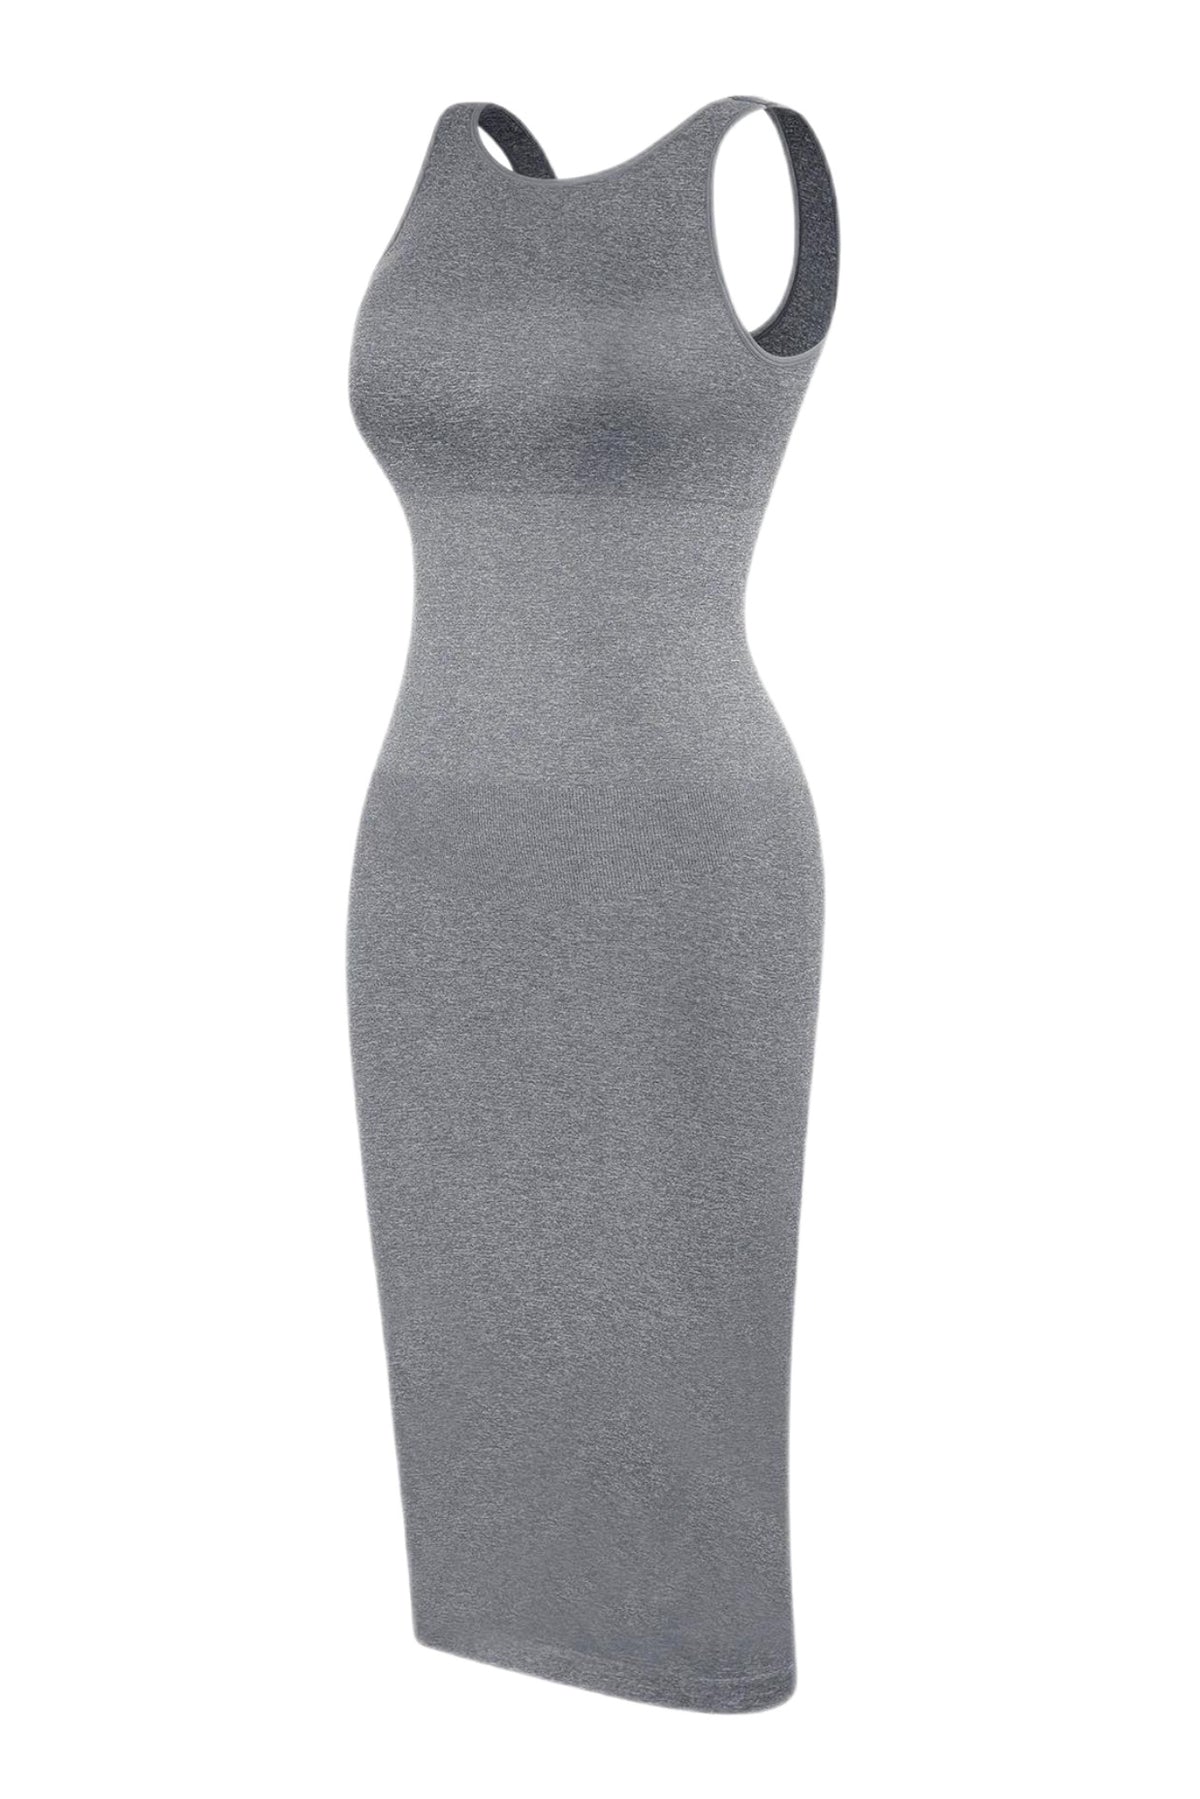 Reign Shaping Dress - Heather Grey Eco